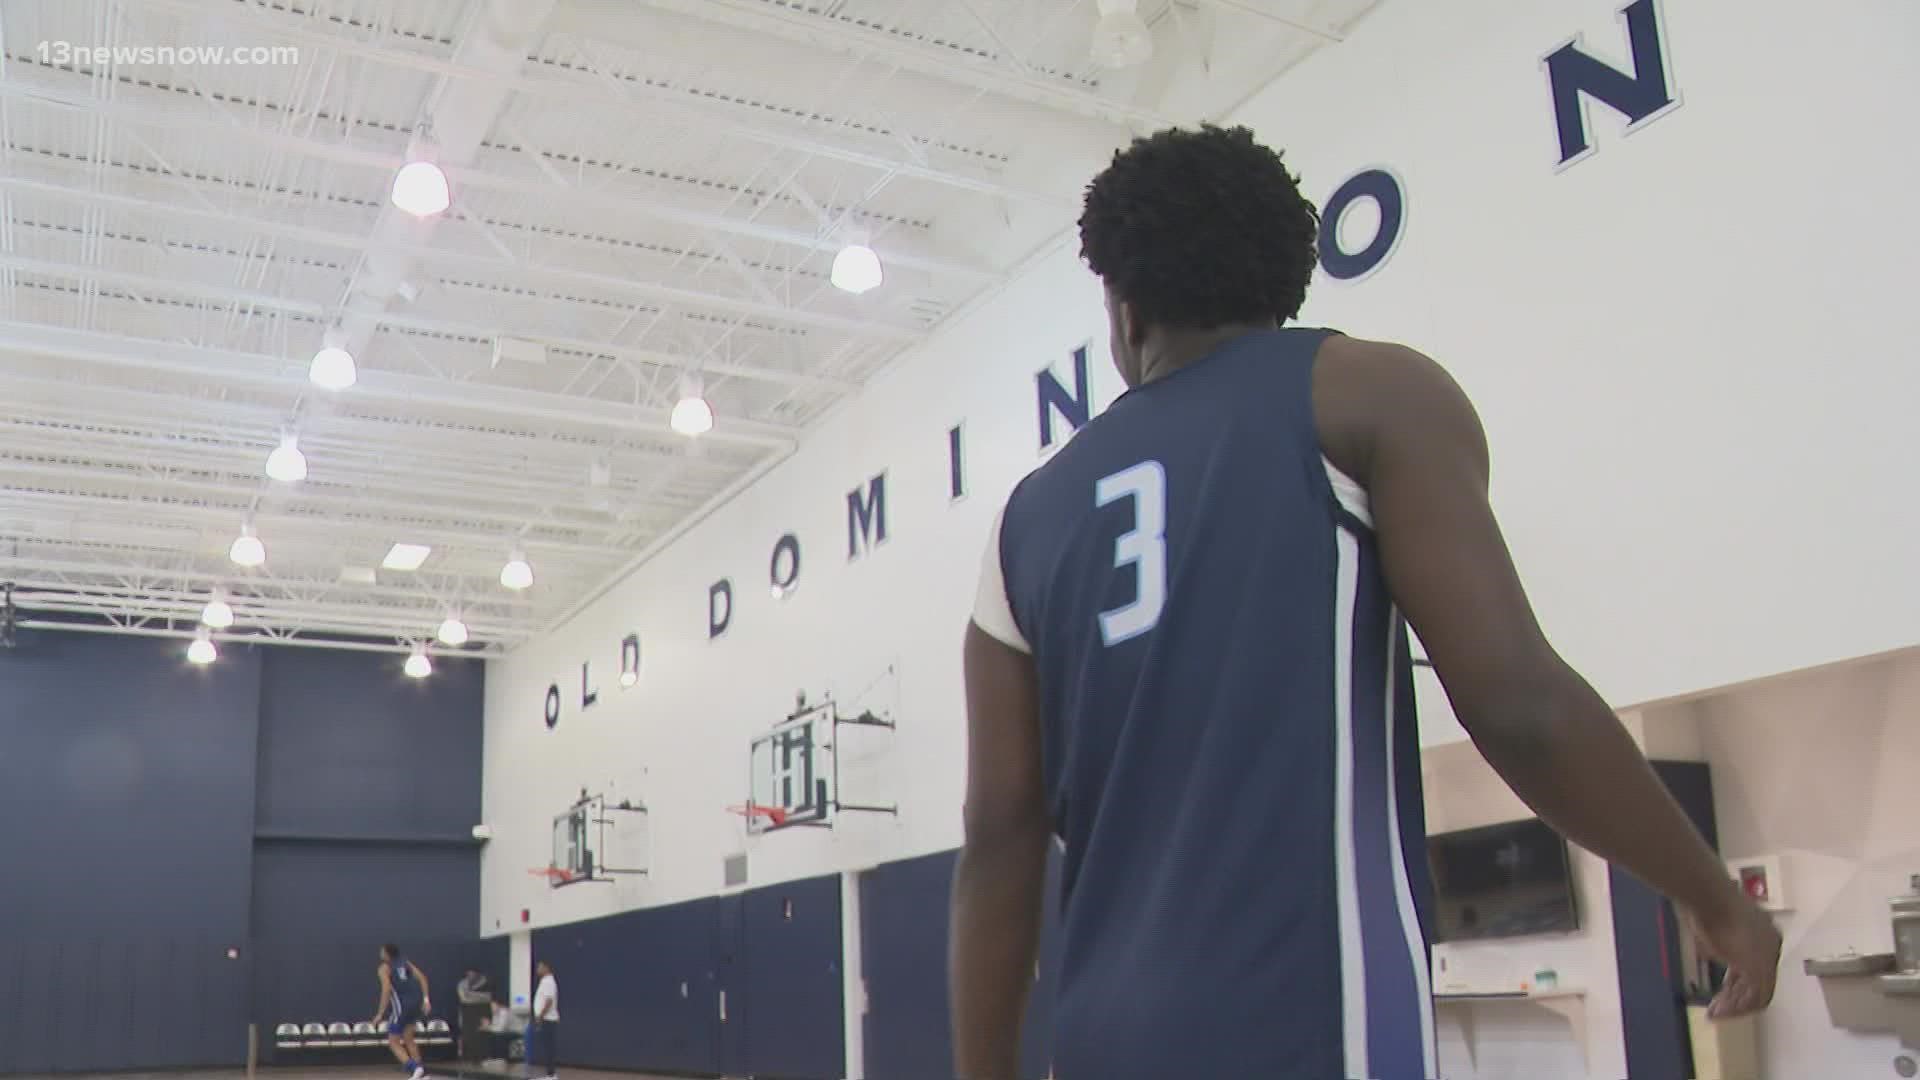 ODU point guard traveled back to Norfolk with the team